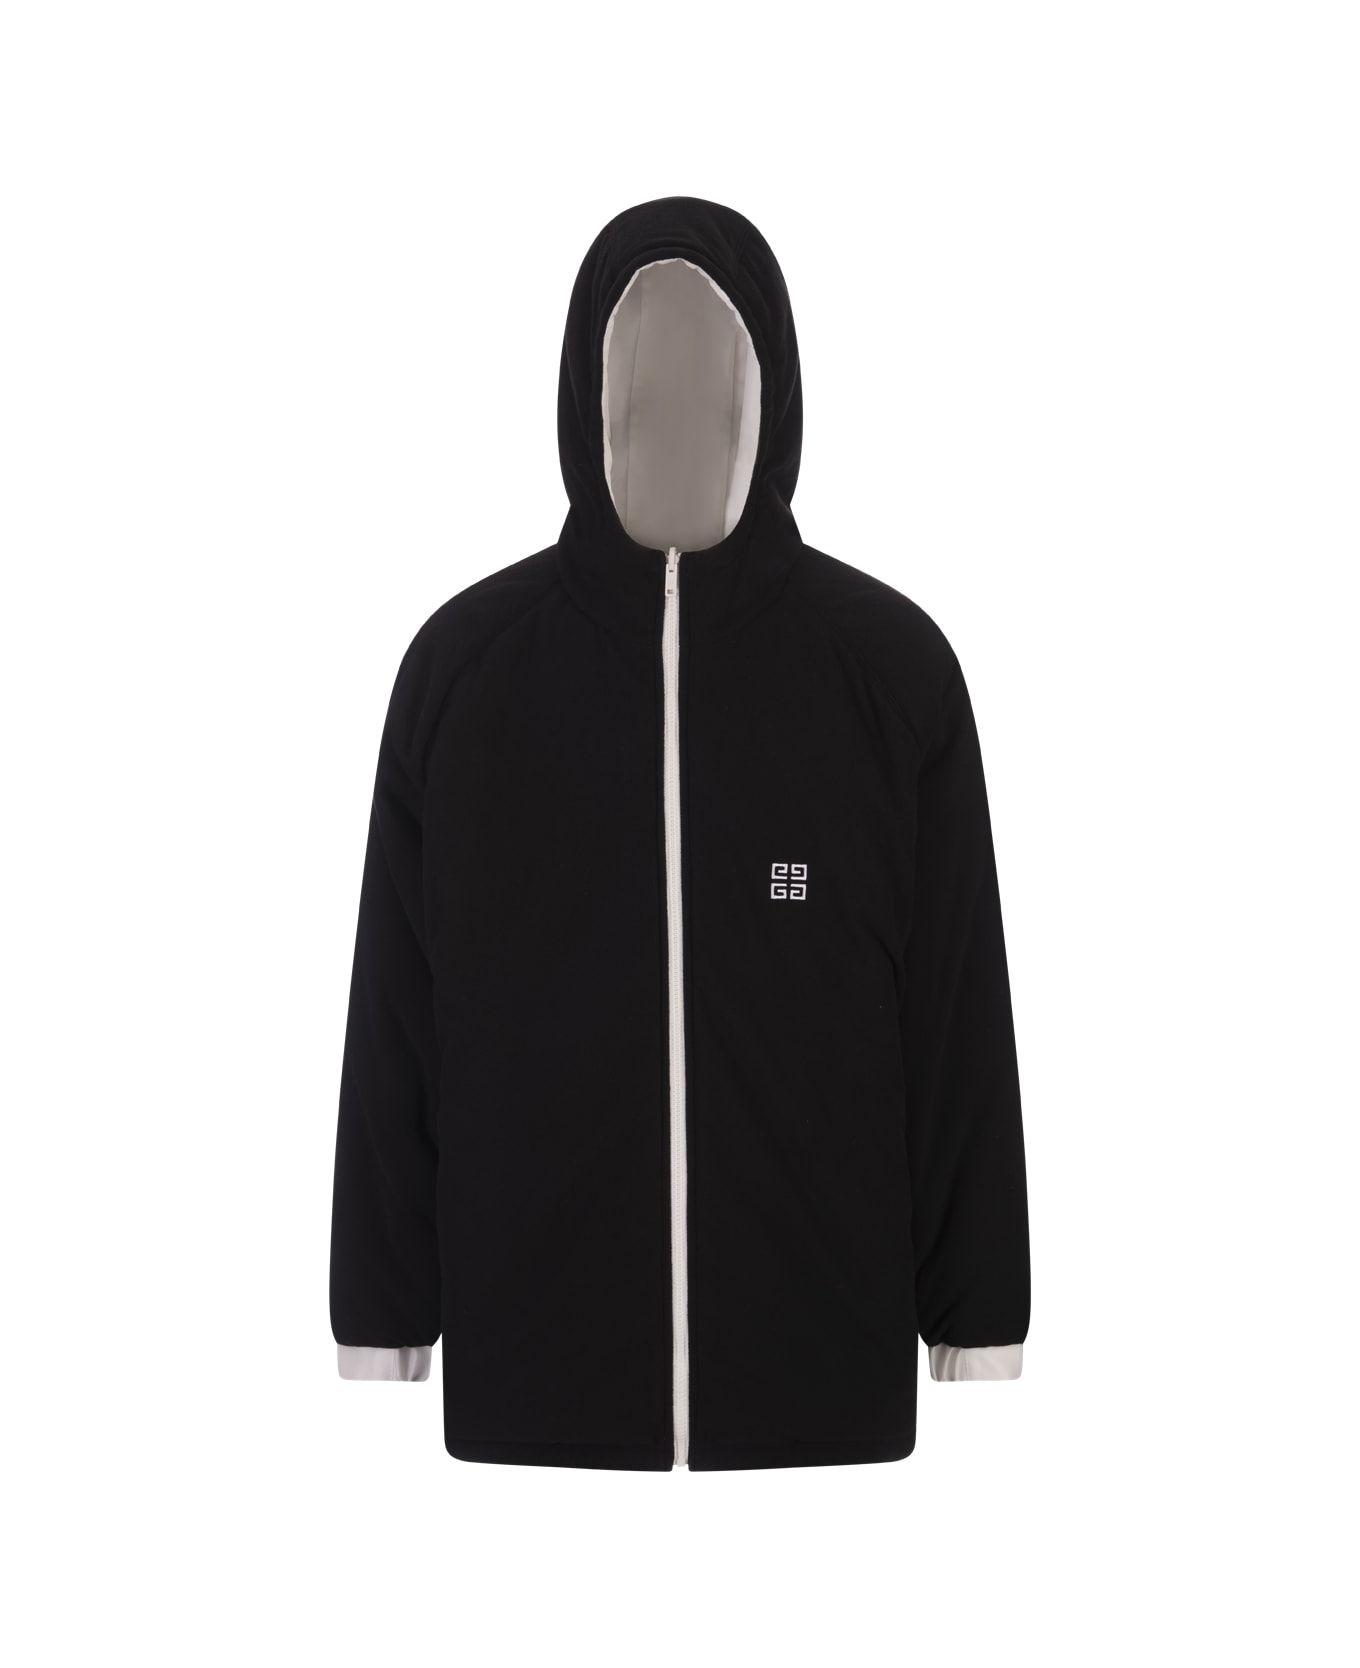 Givenchy Black/white Givenchy Reversible Football Parka In Fleece - White